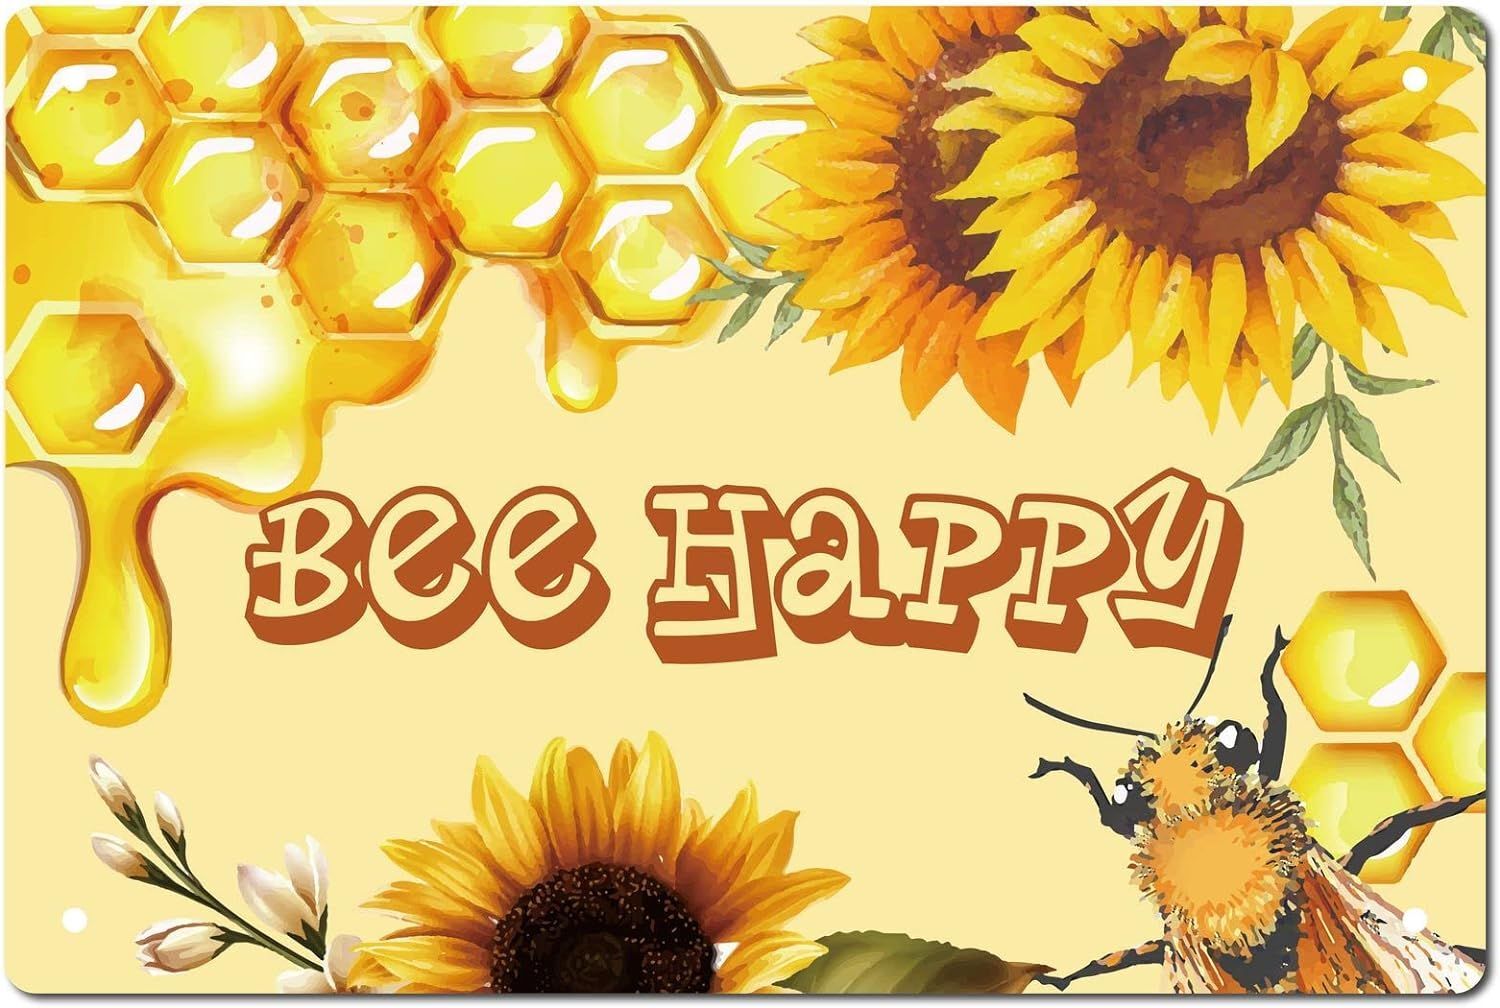 Bee Happy Sign Tournesols M¿¿tal Tin Signs Vintage Rustic Wall Art Decor Garden House Plaque Poster Artwork Gift for Home Farm Garden Kitchen Coffee Office Garage Decoration 12 x 8Inch